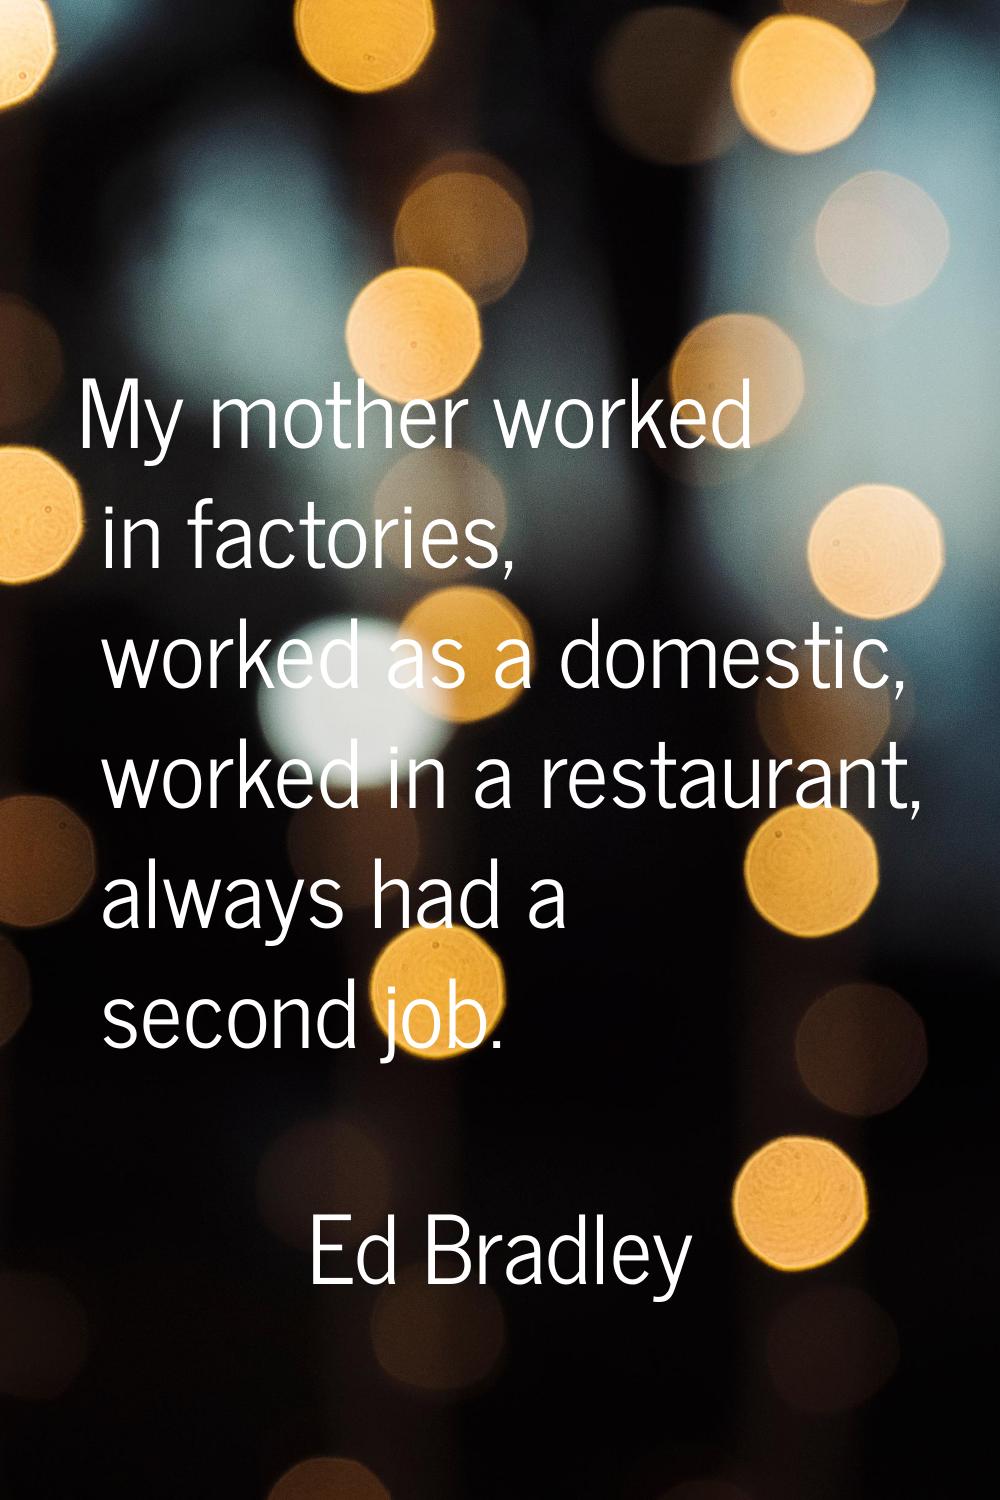 My mother worked in factories, worked as a domestic, worked in a restaurant, always had a second jo